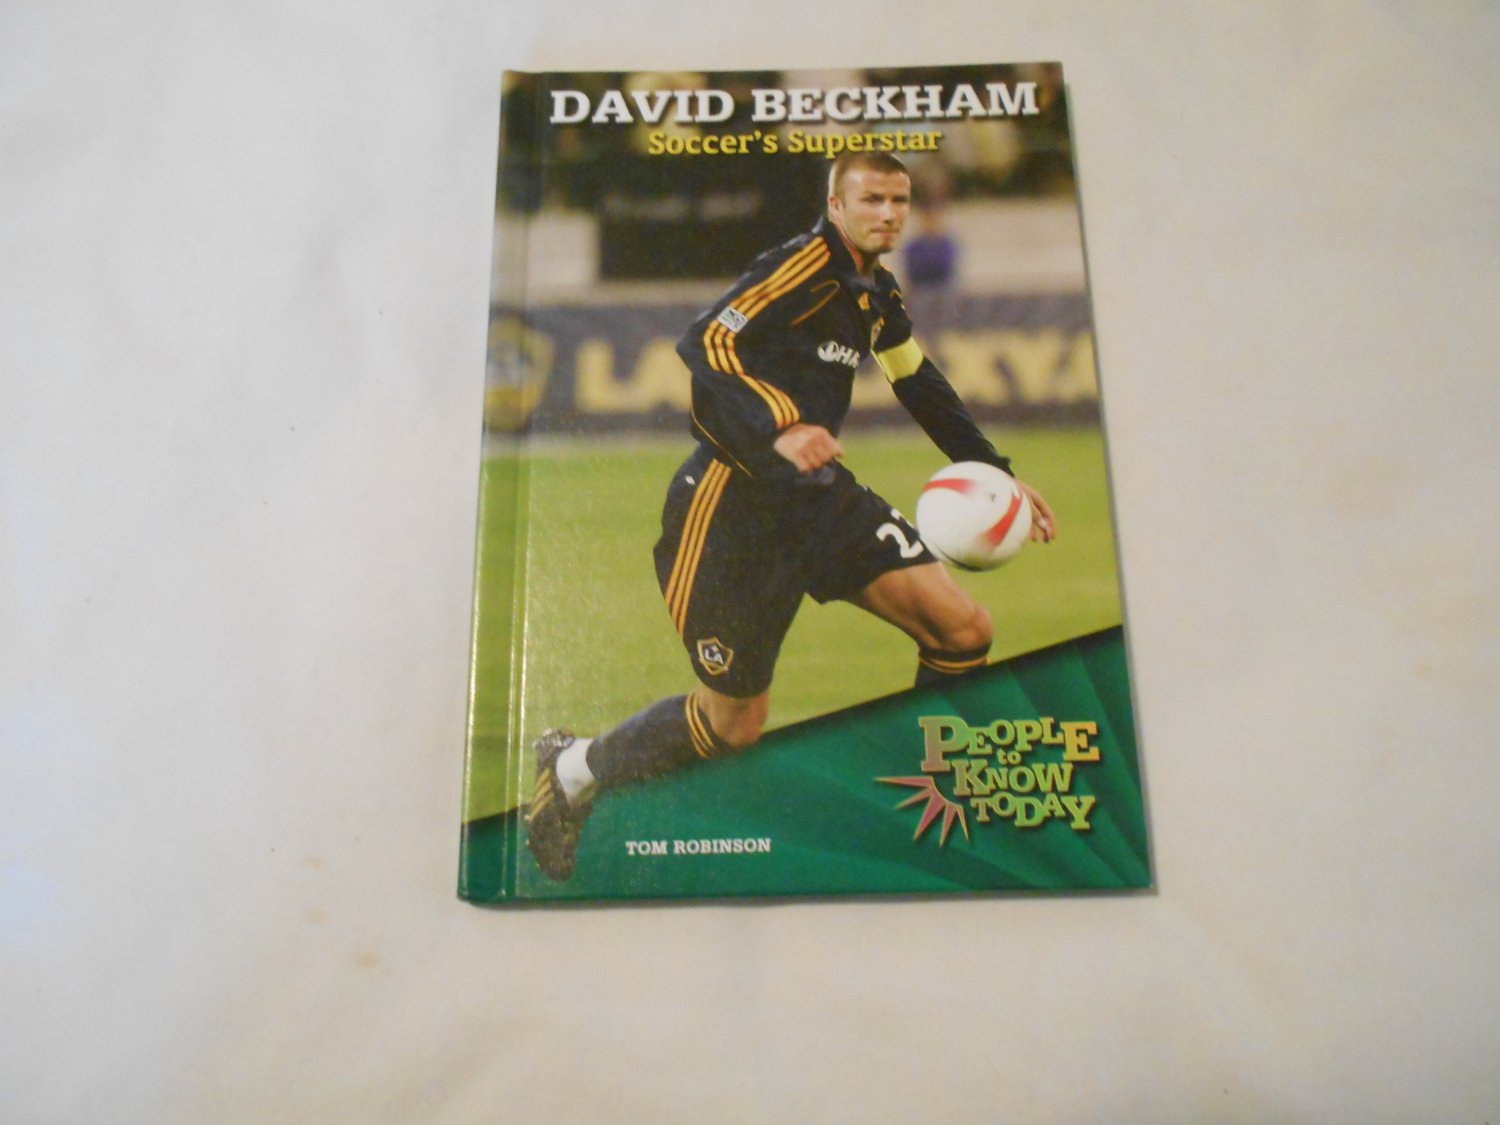 David Beckham: Soccer's Superstar by Tom Robinson (2008) (130) People to Know Today